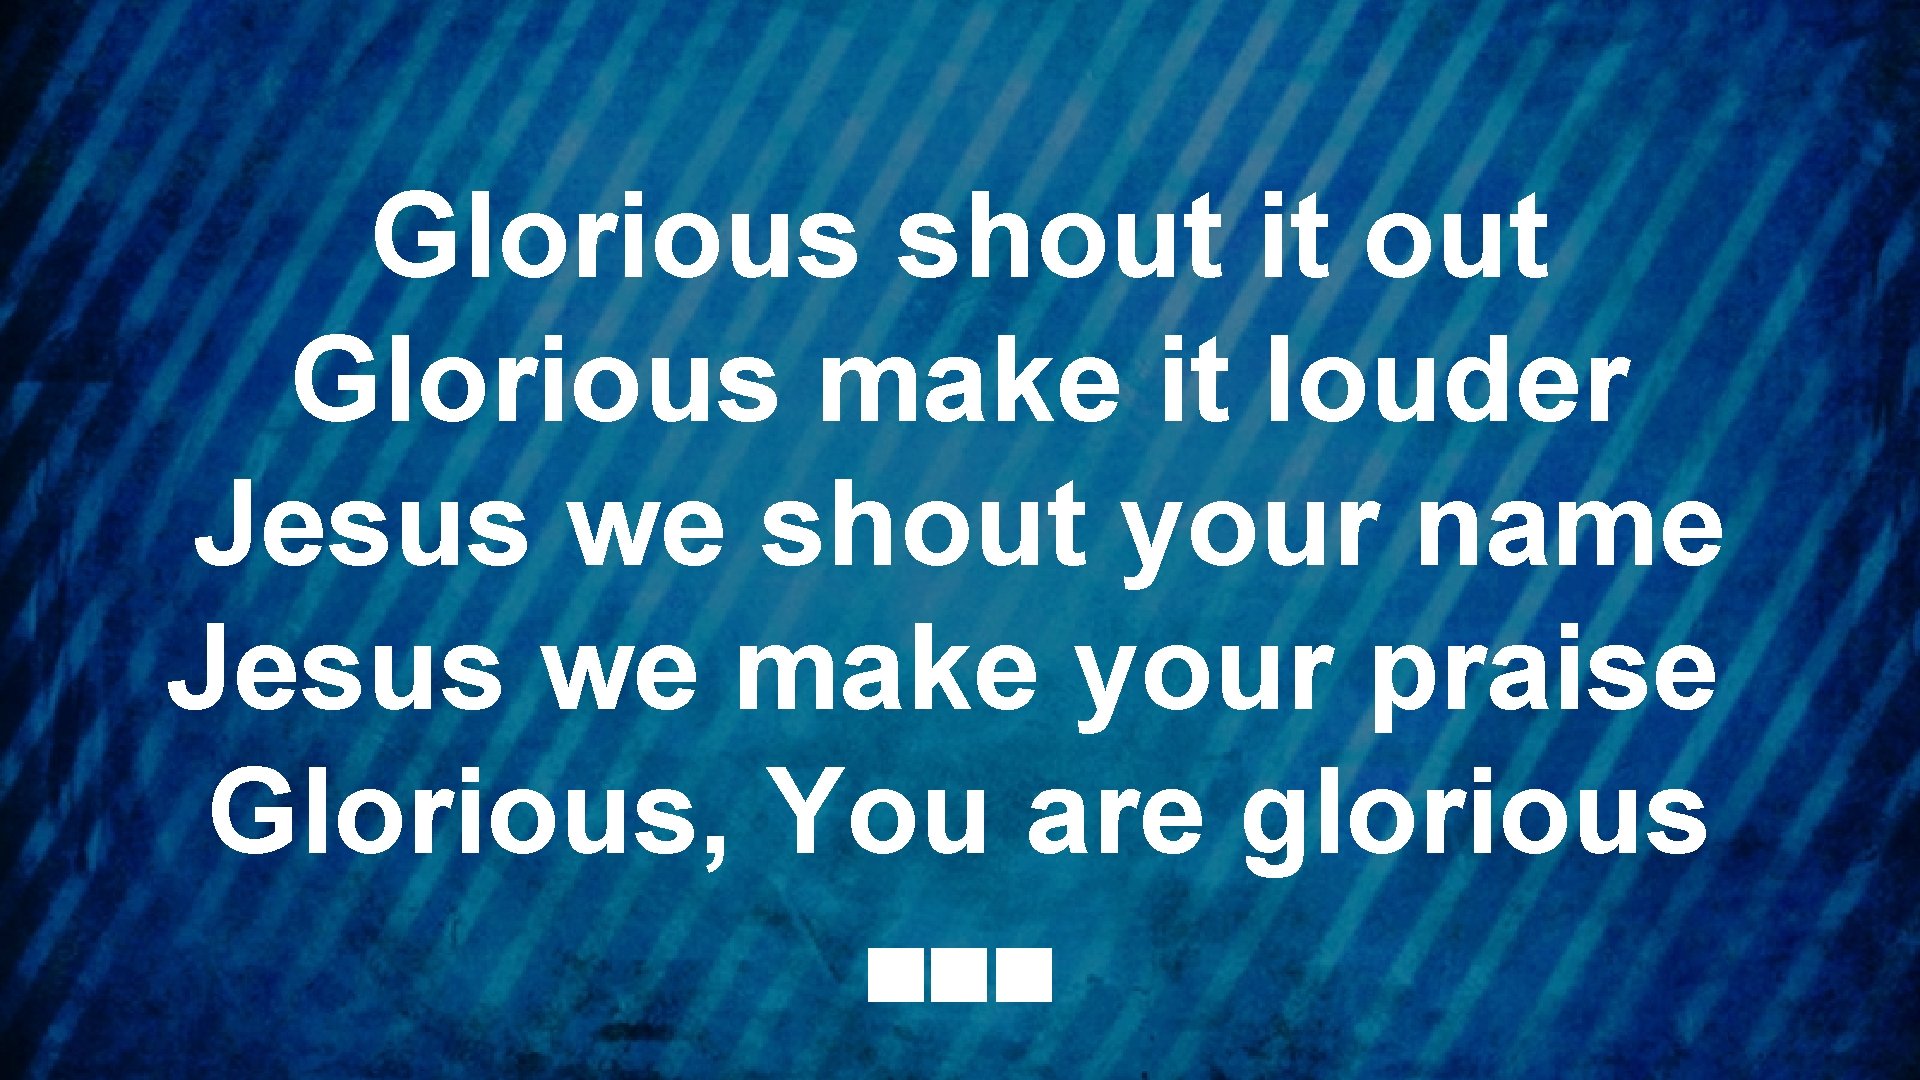 Glorious shout it out Glorious make it louder Jesus we shout your name Jesus